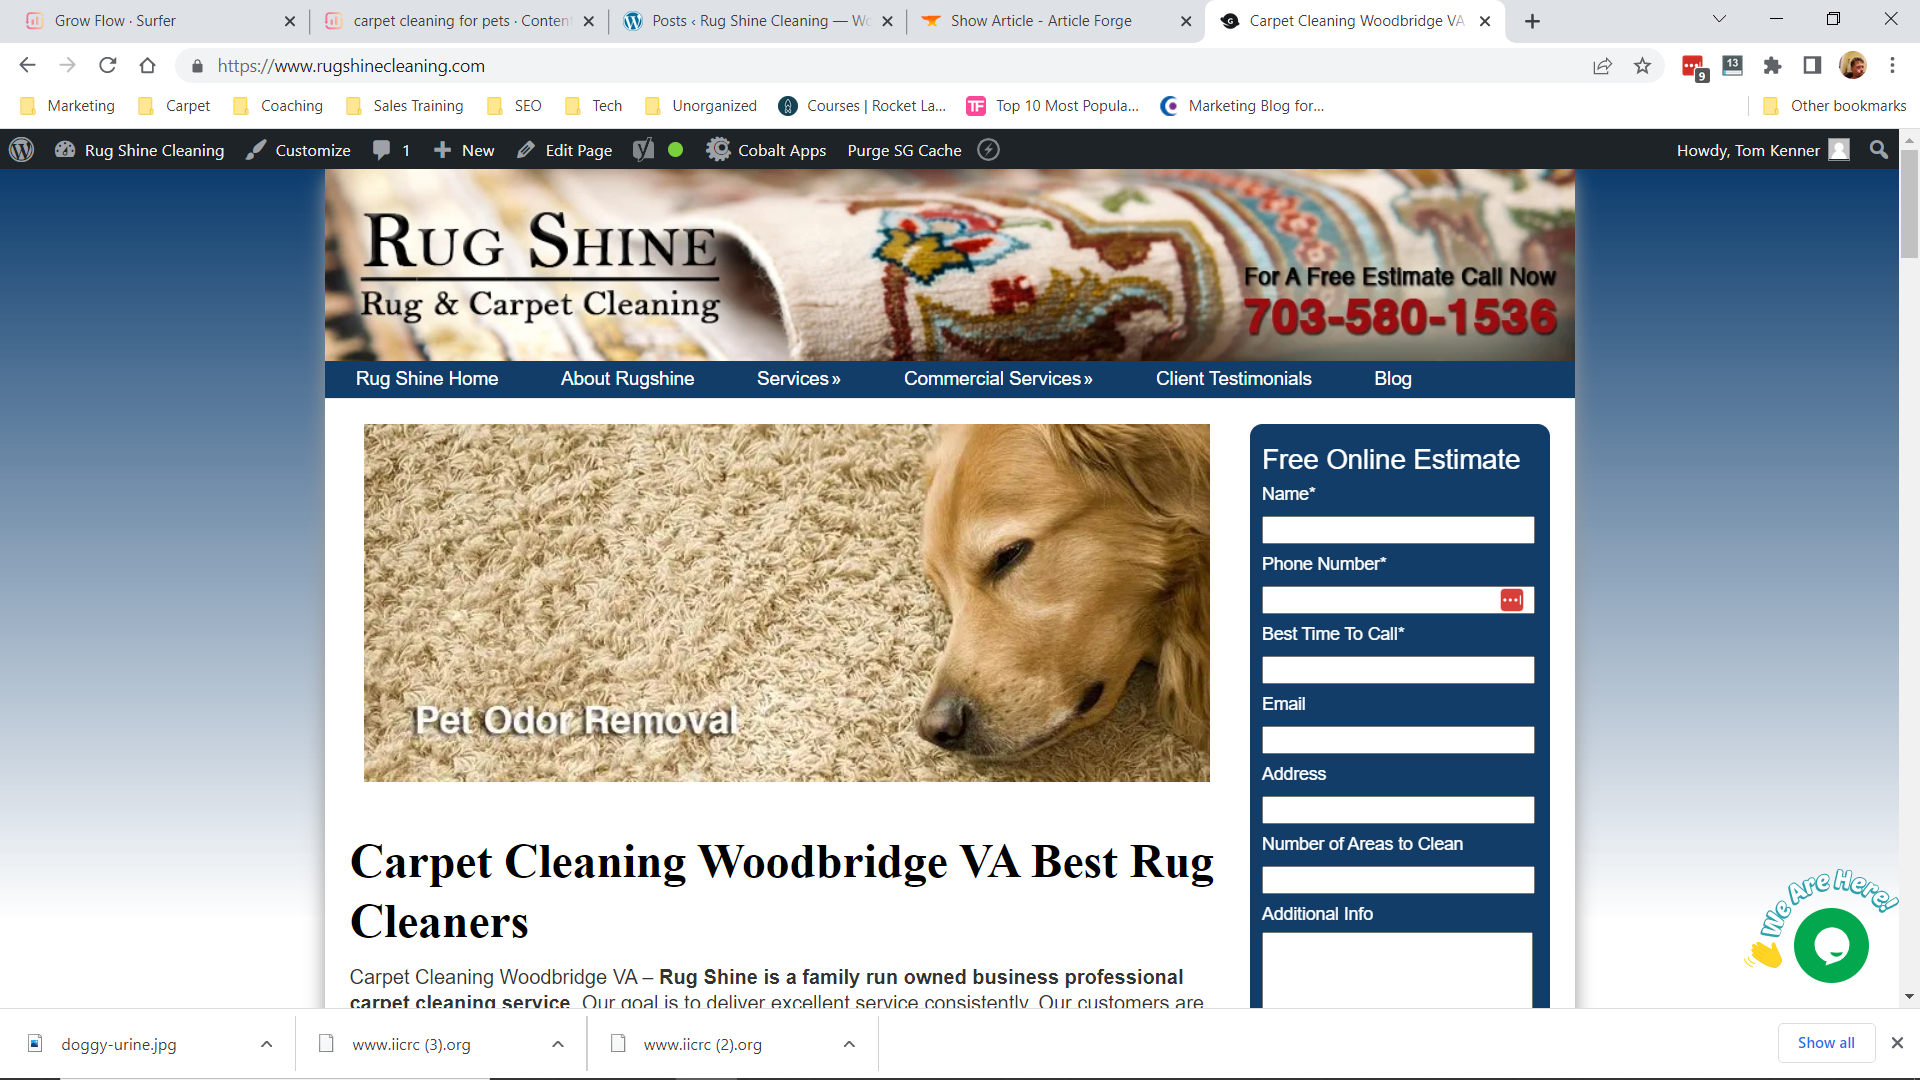 Rug Shine uses commercial carpet cleaning machines to remove debris, dust and spills.